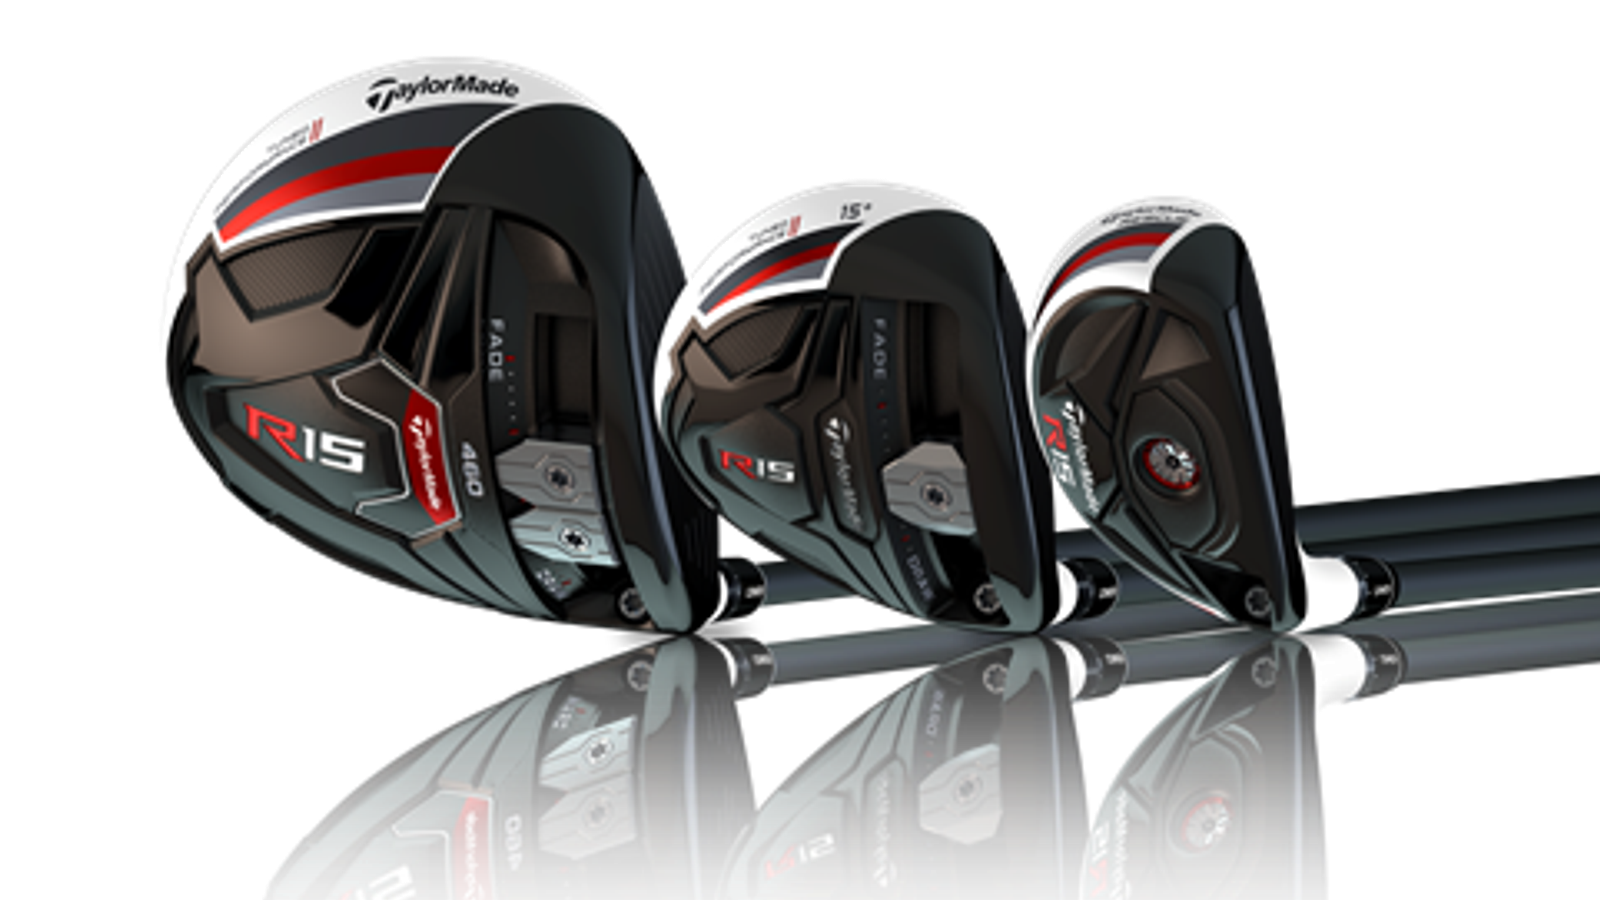 TaylorMade golf review: Sky Sports takes a look at more new offerings